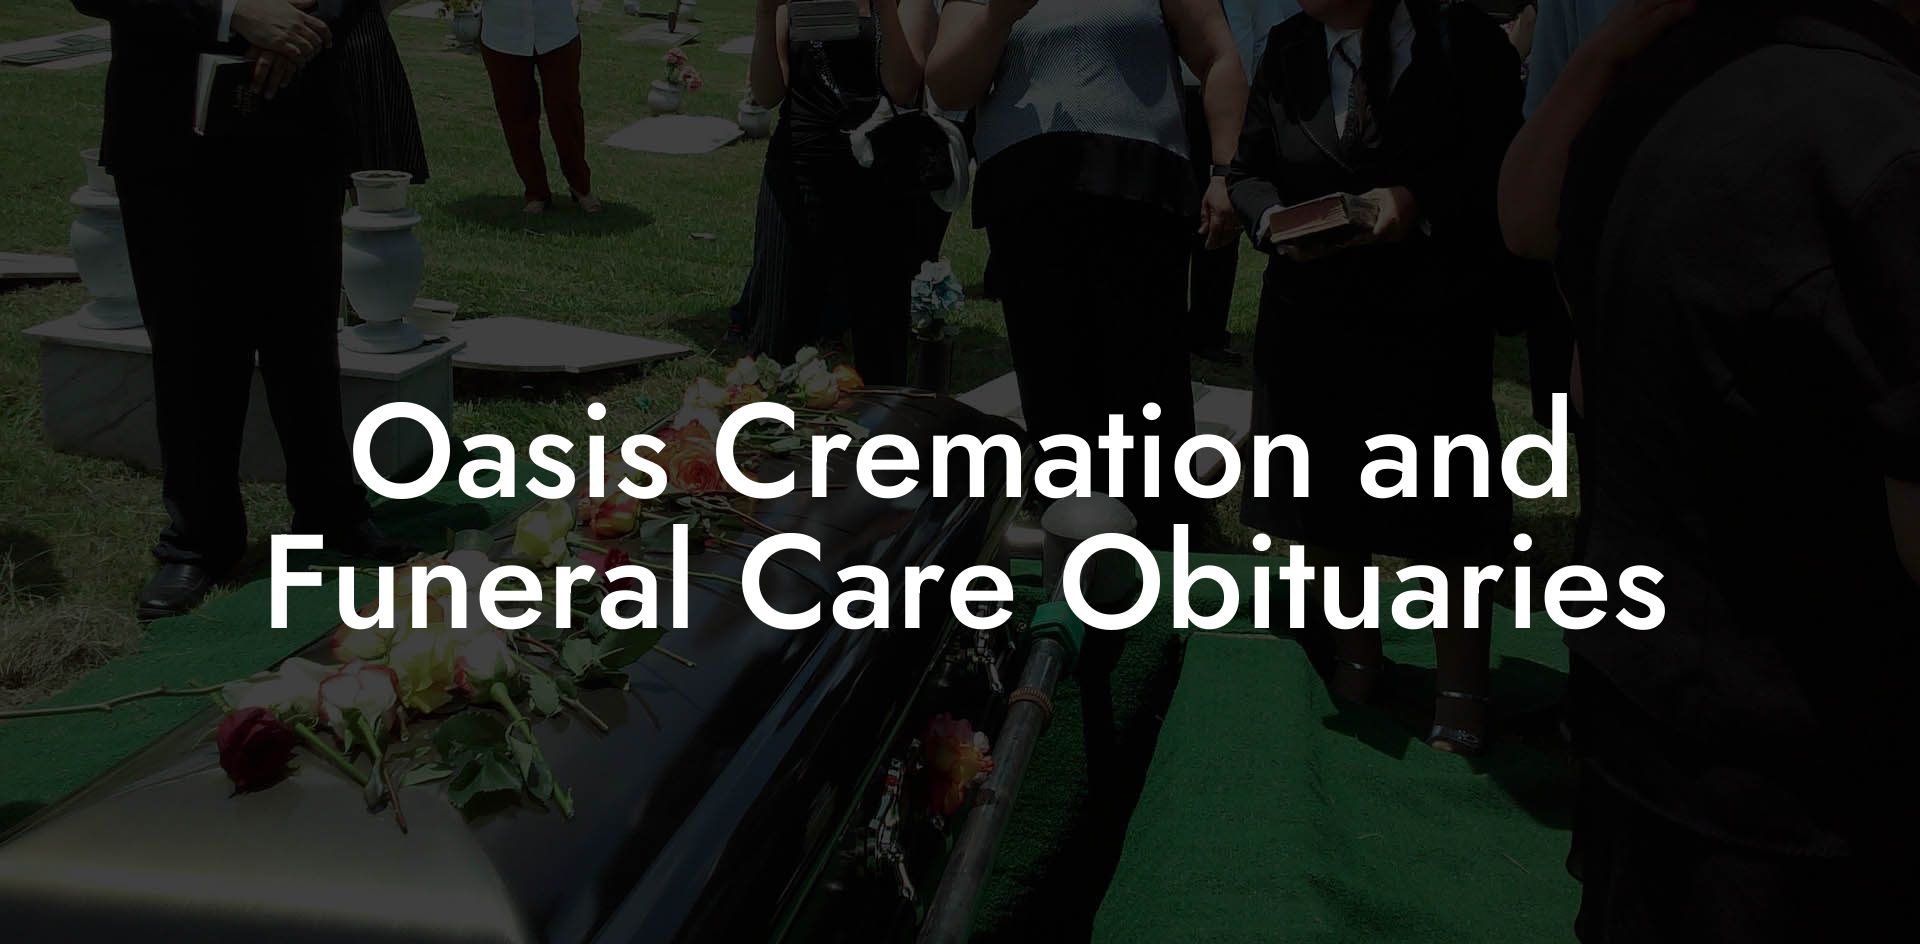 Oasis Cremation and Funeral Care Obituaries